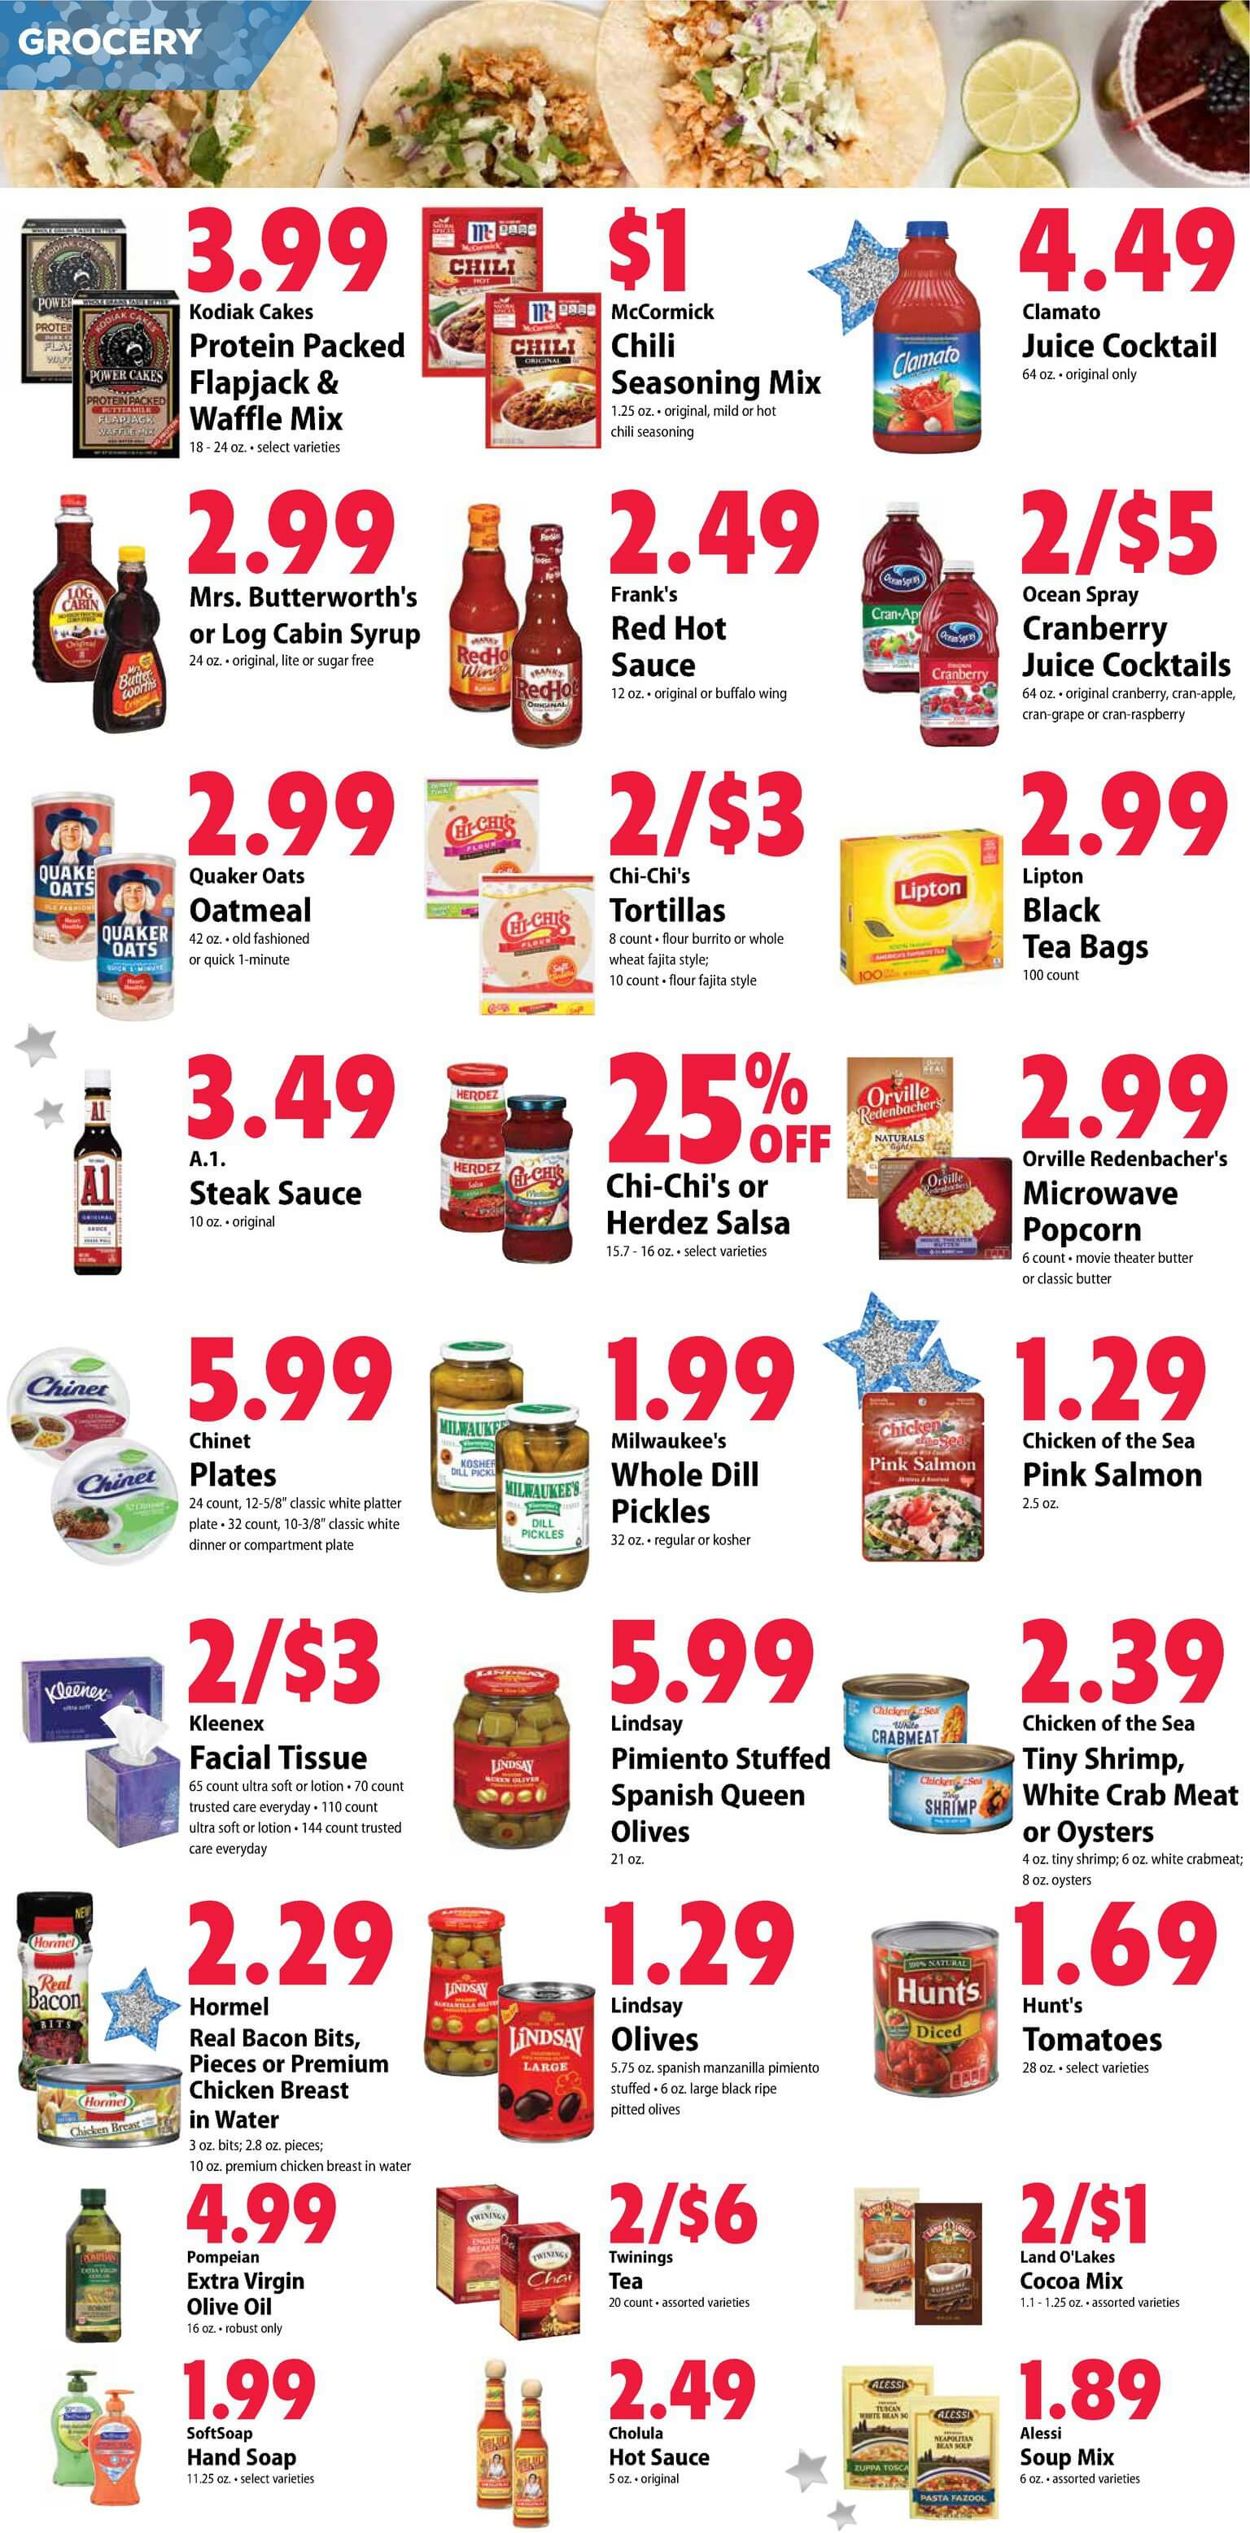 Festival Foods - New Year's Ad 2019/2020 Weekly Ad Circular - valid 12/25-12/31/2019 (Page 6)